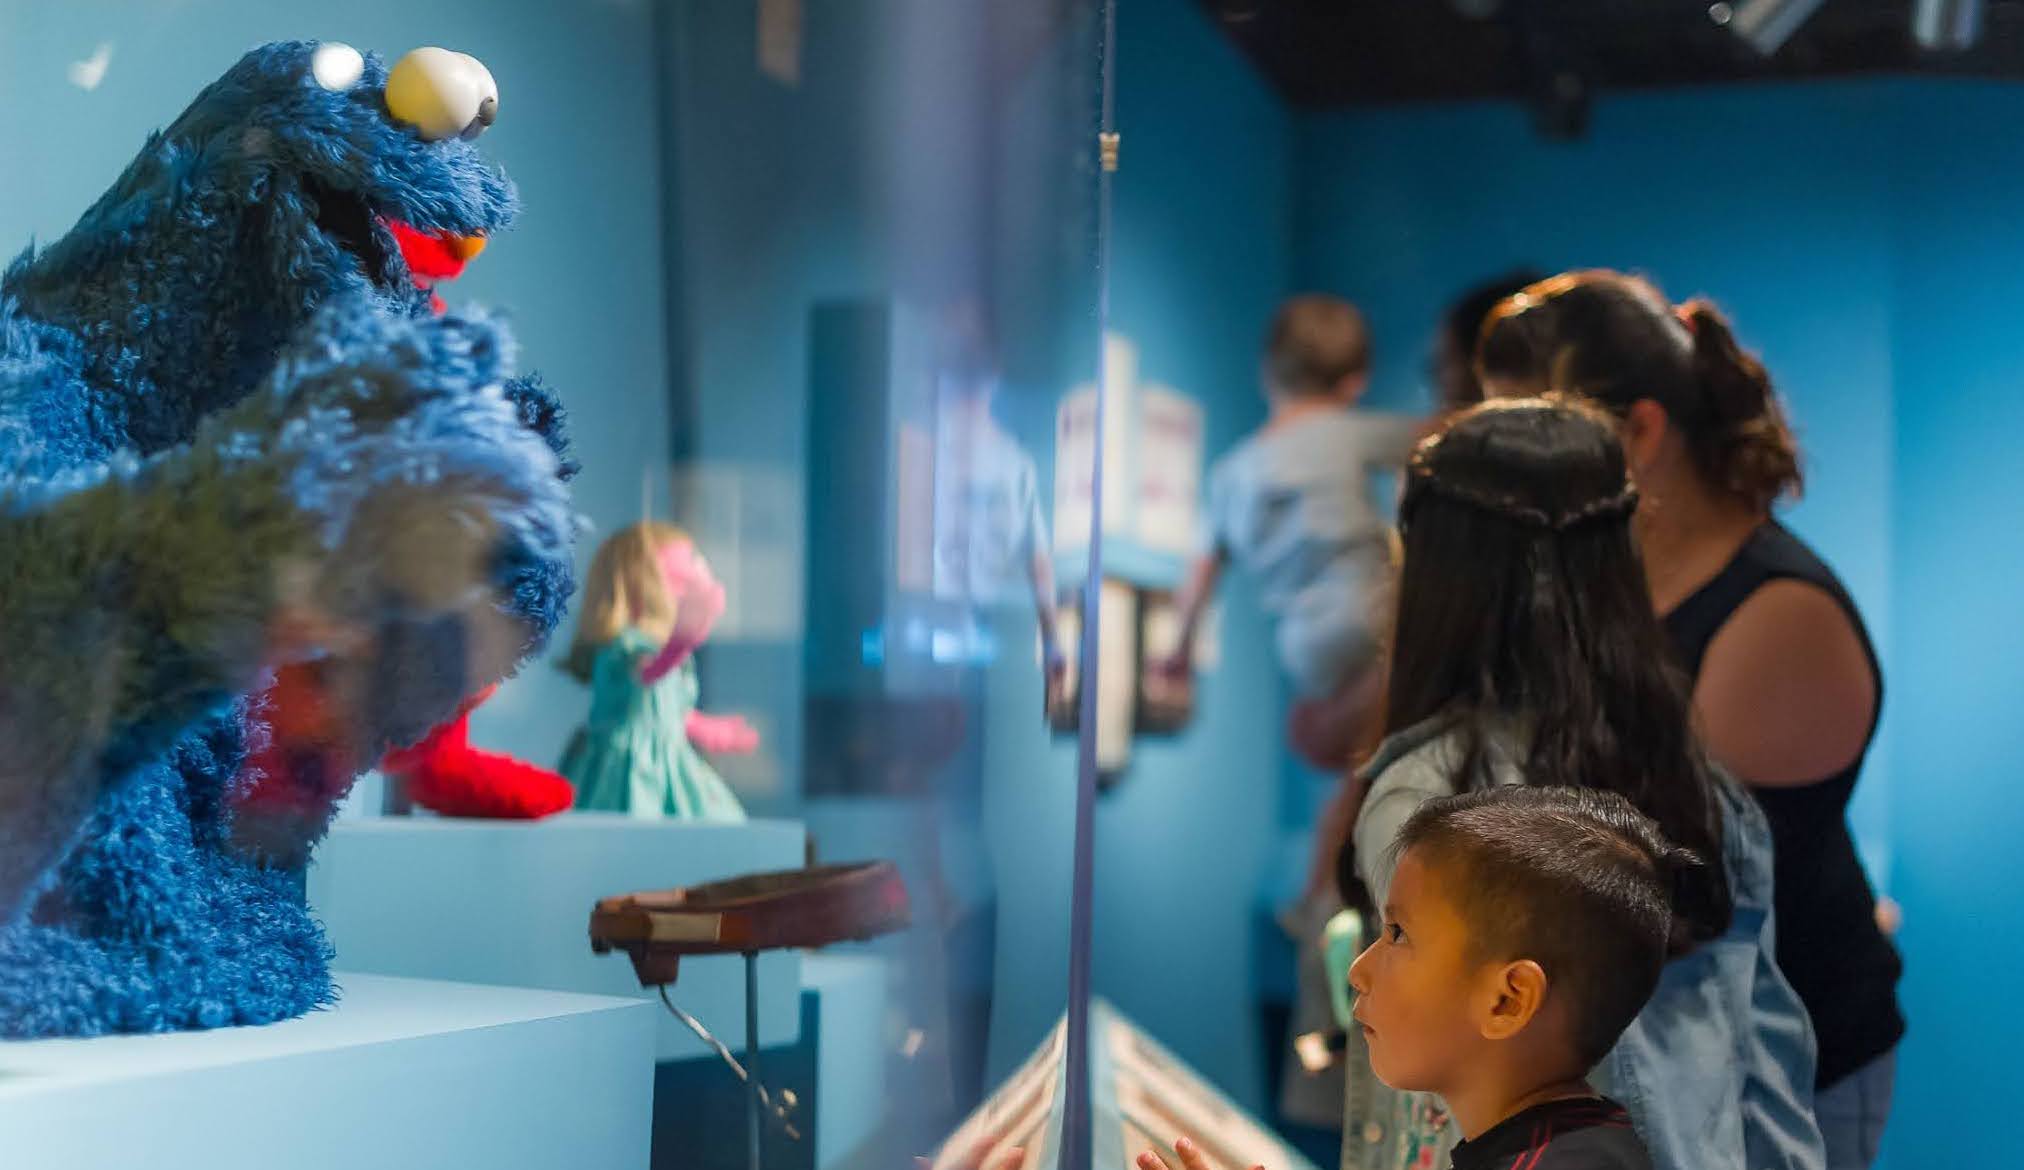 A little boy stares up at Cookie Monster in a class case at the Museum.